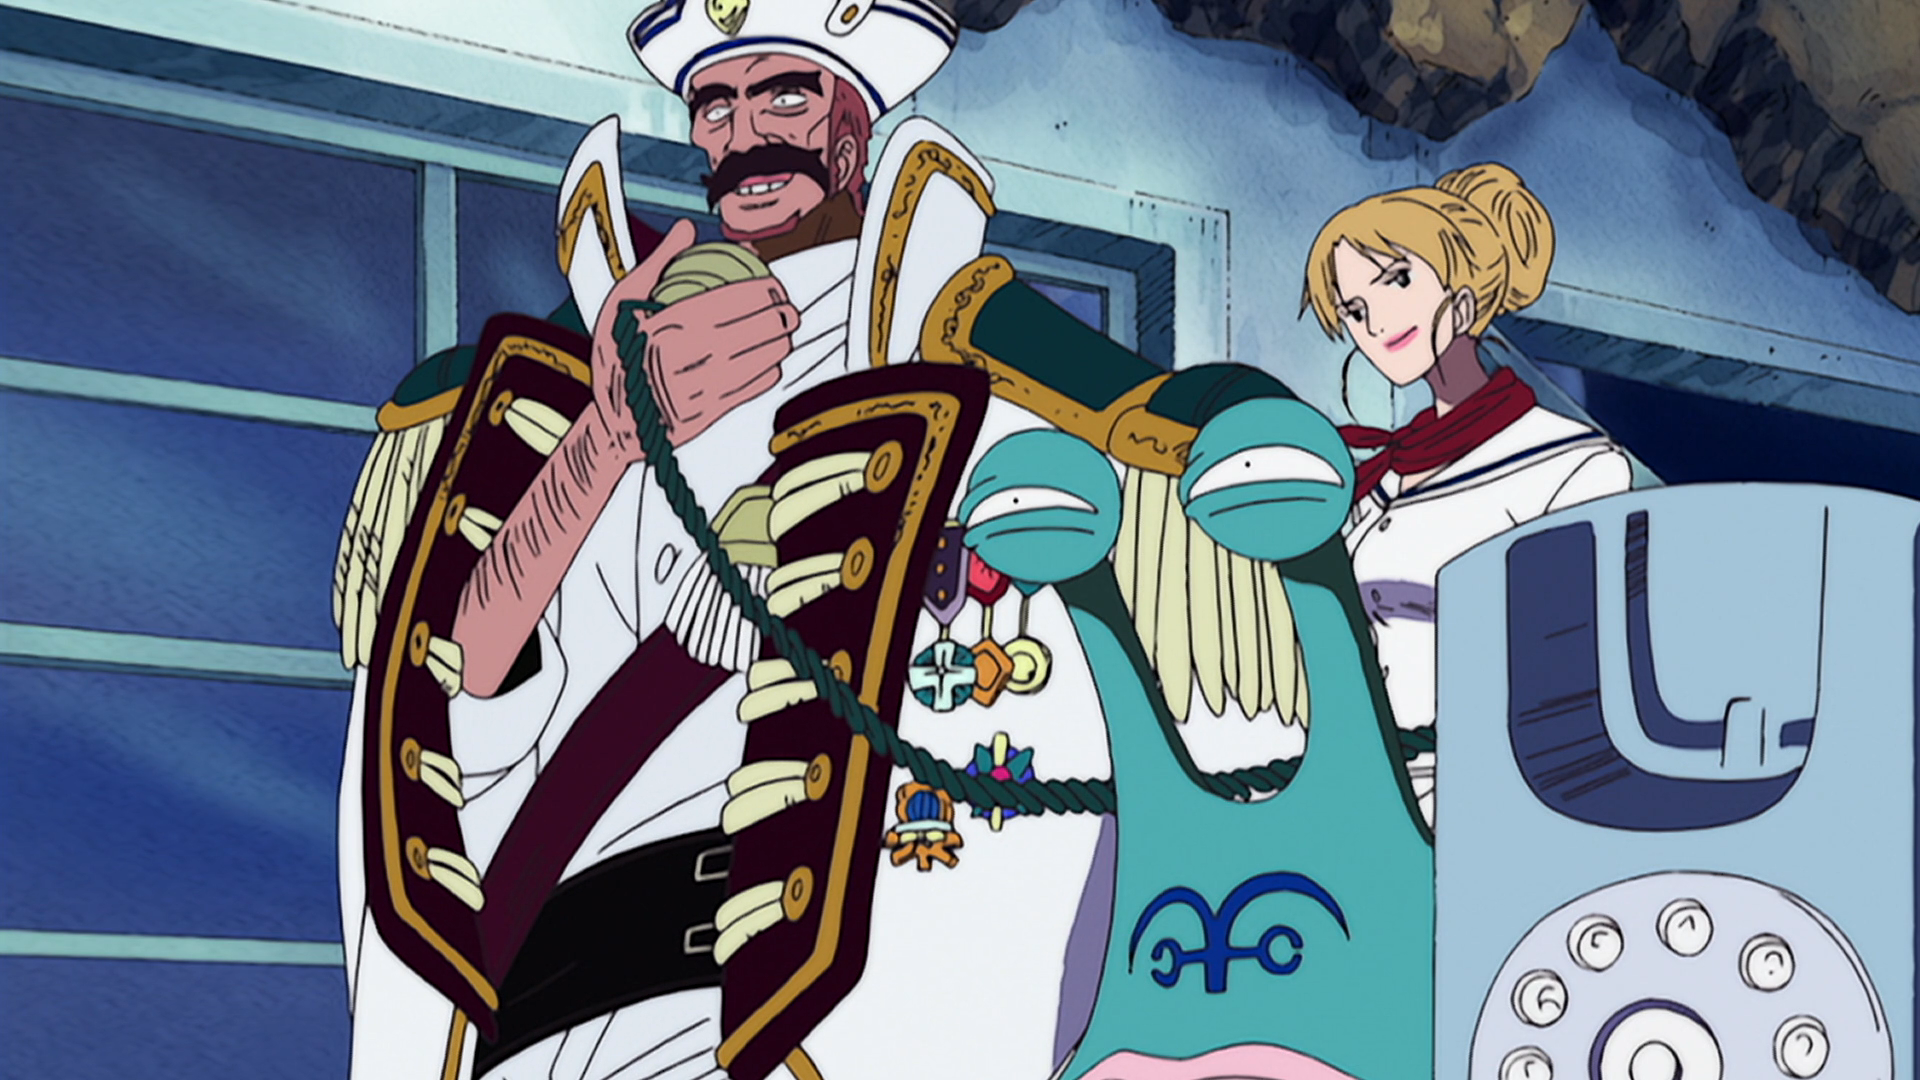 Reasons why I consider One Piece G8 Arc to be Canon